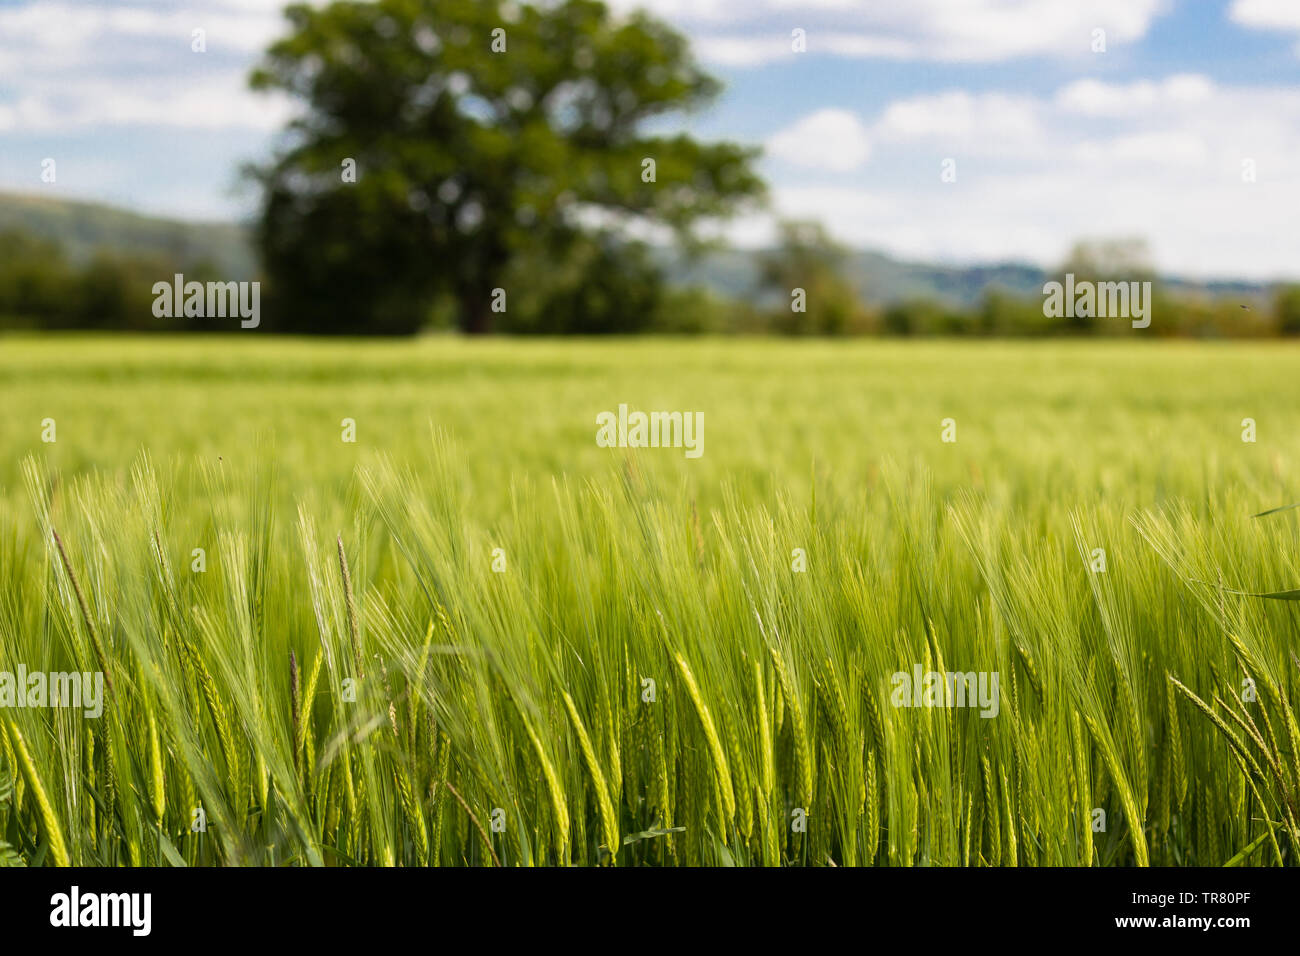 A field of green barley crop, shallow depth of field for a blurred background of a lone oak tree Stock Photo